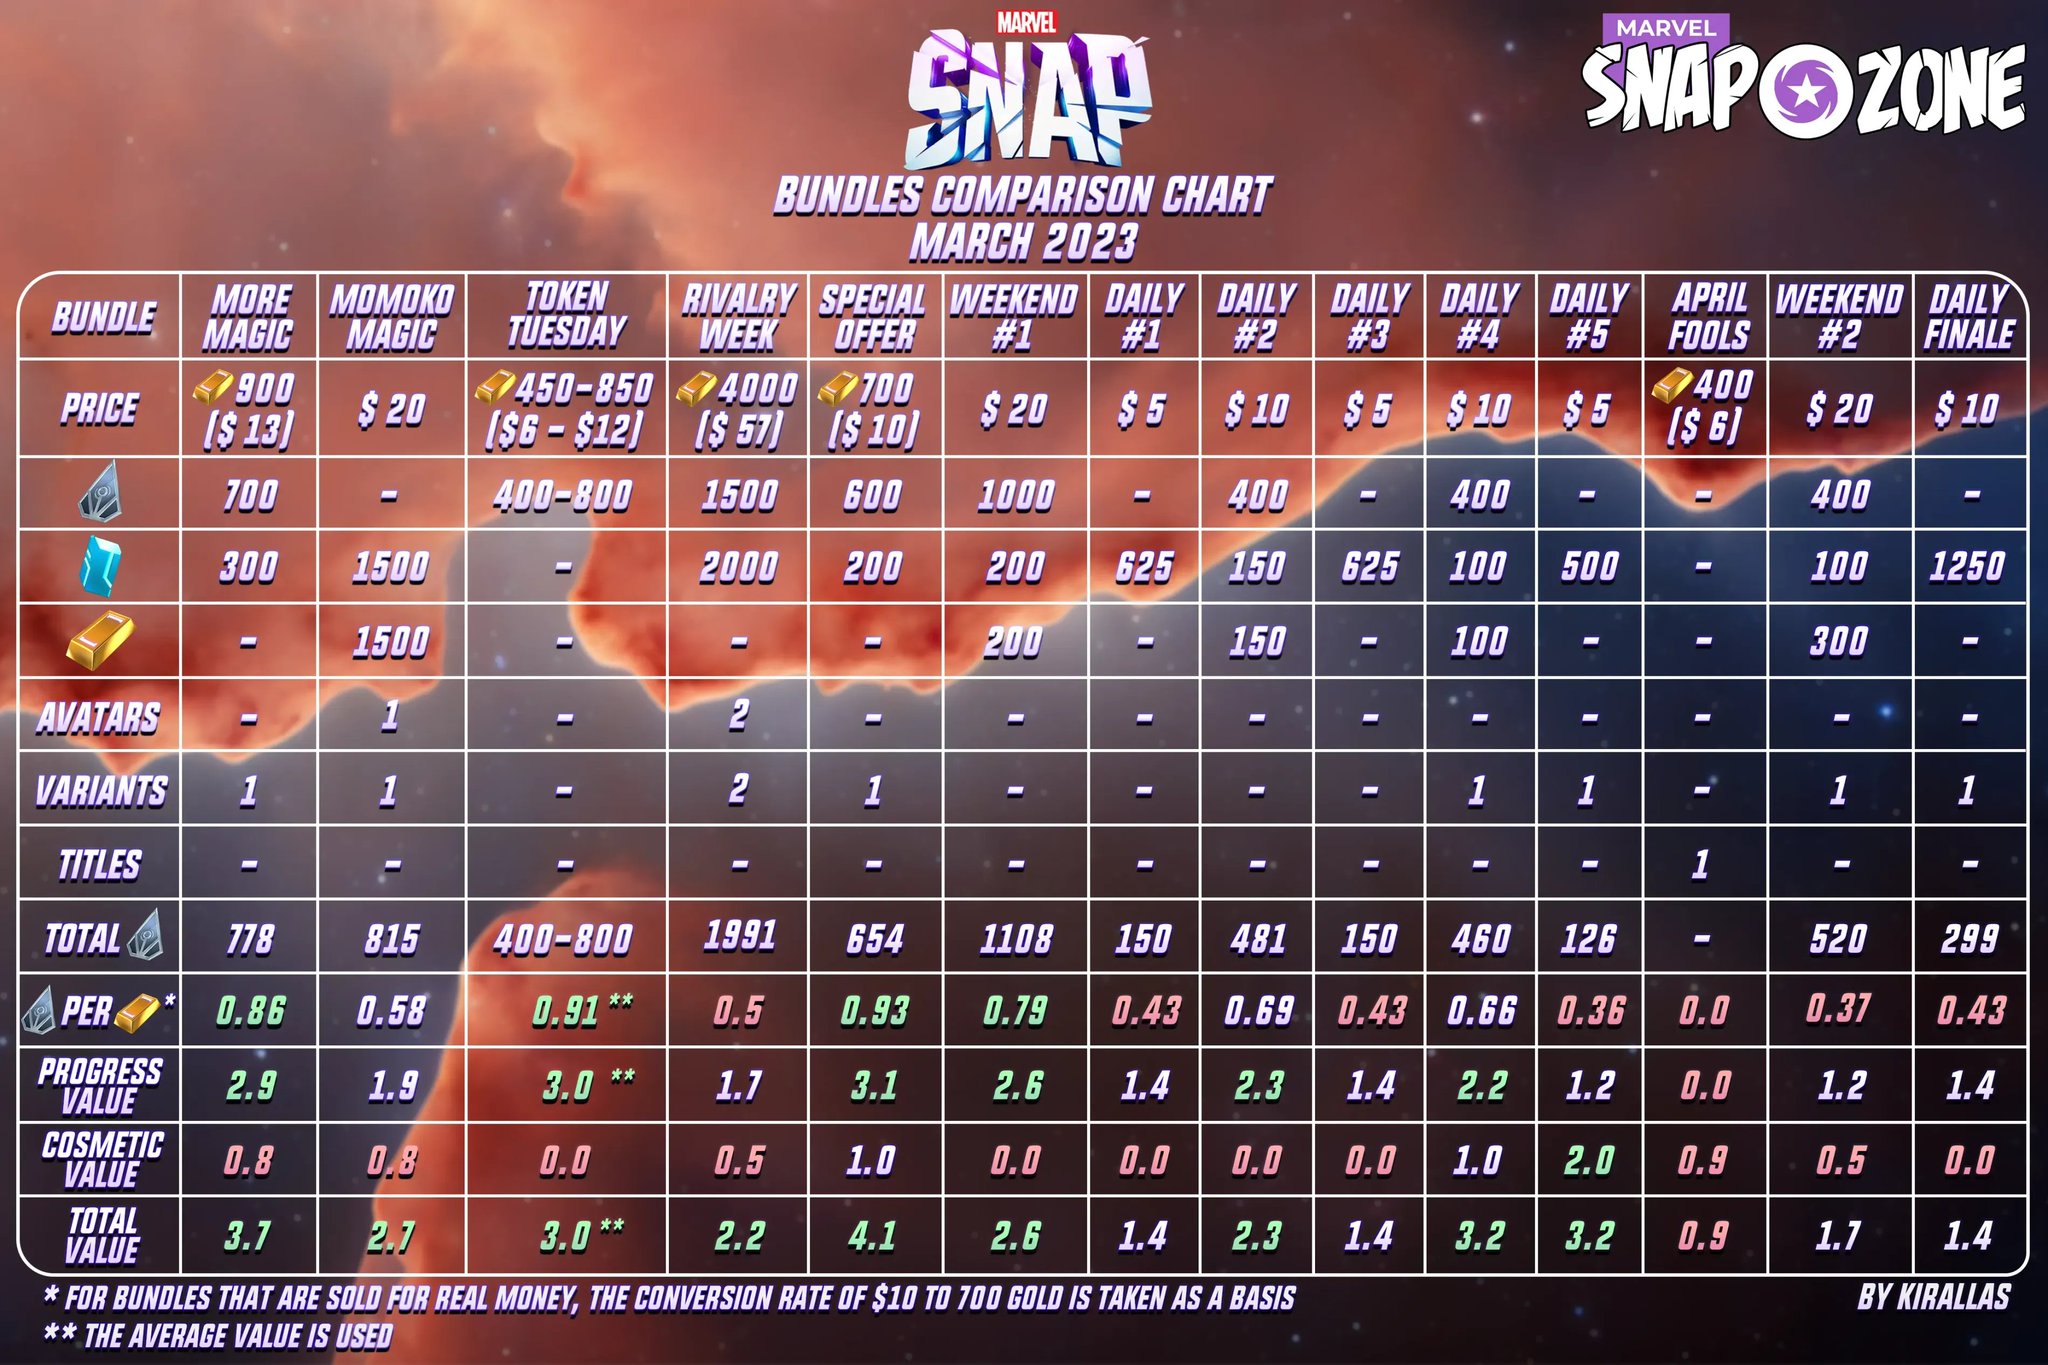 Marvel Snap February 2023 Bundles Guide - Value and Comparison